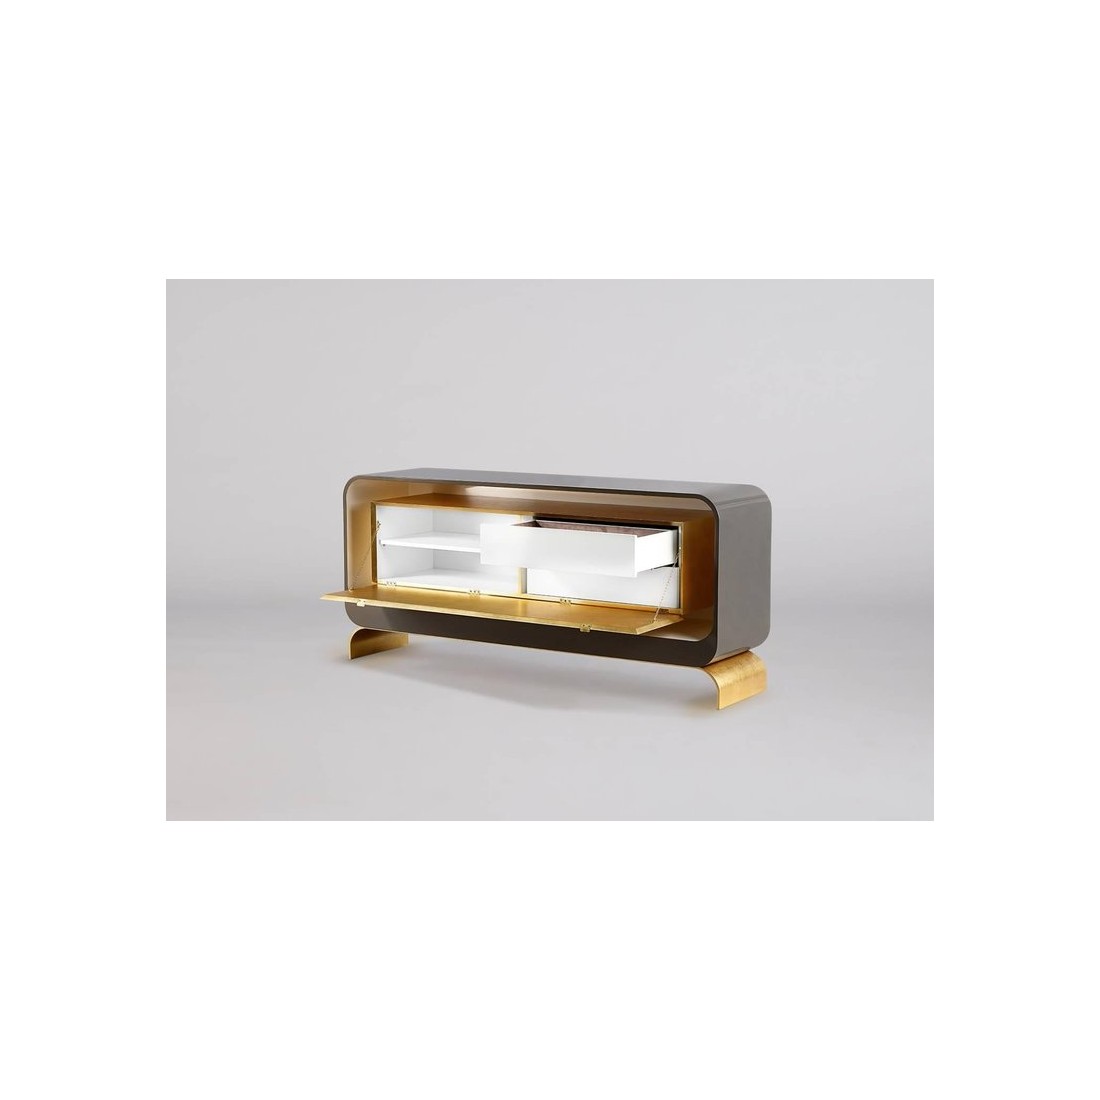 Р‘СѓС„РµС‚ Lingot Smoke Sideboard, Contemporary Gold Leaf and Lacquer Sideboard